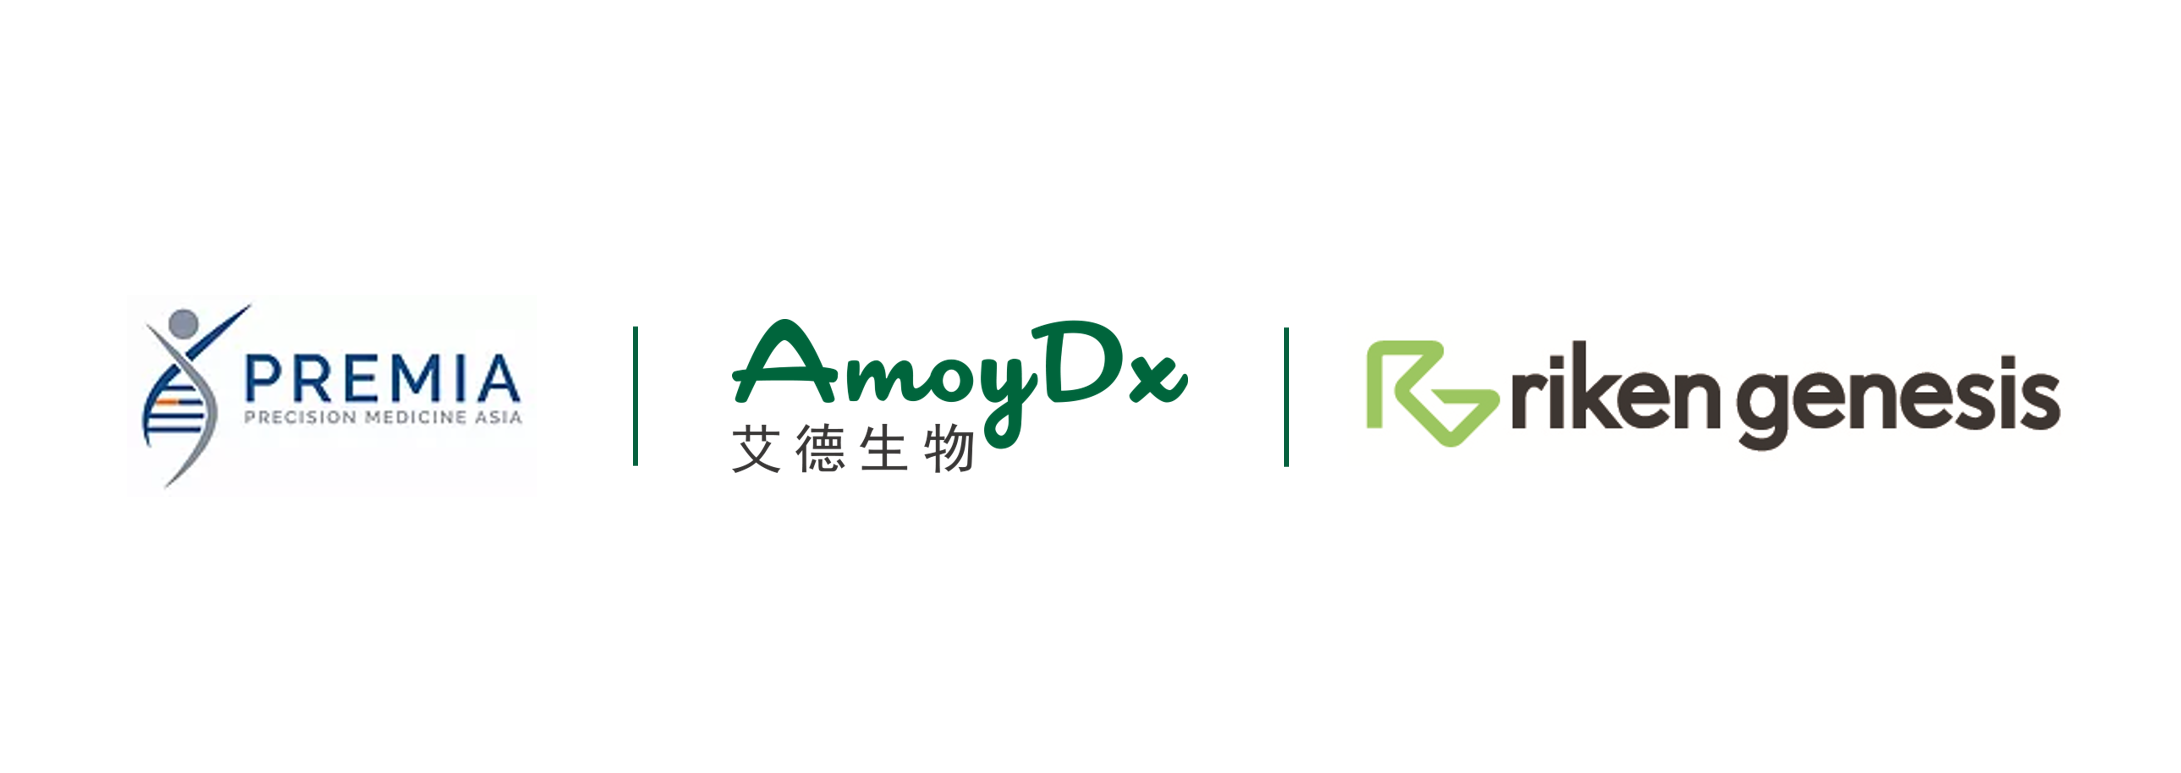 MHLW Approves AmoyDx<sup>®</sup> Pan Lung Cancer PCR Panel as Companion Diagnostic for Rozlytrek<sup>®</sup> (Entrectinib) in Japan